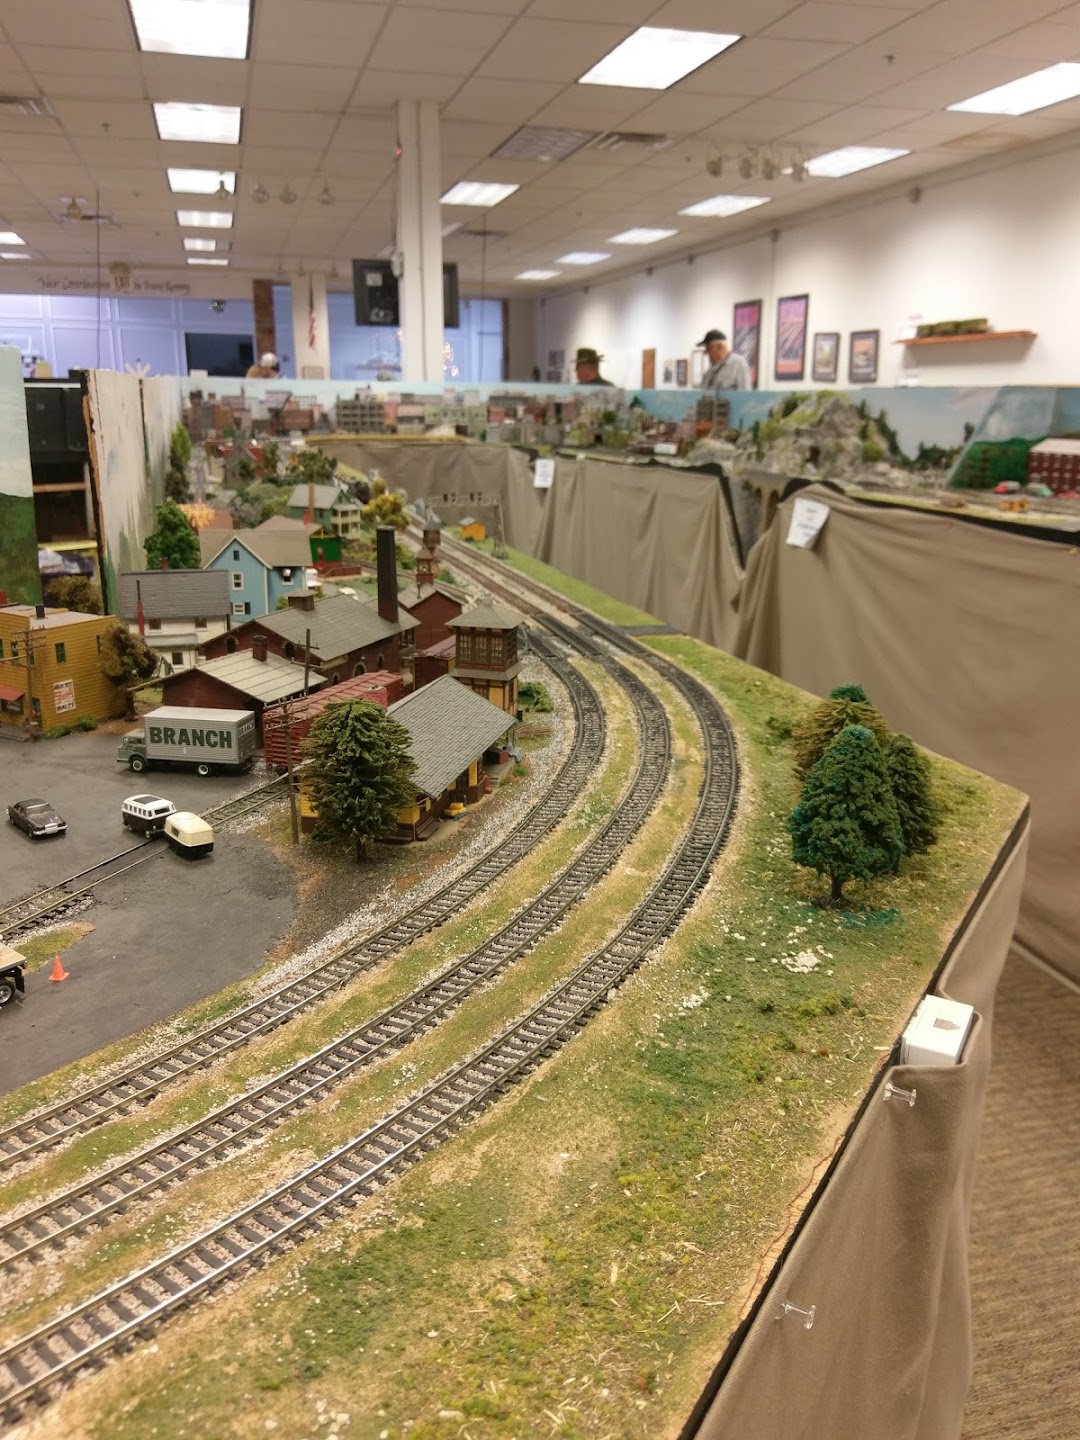 The Augusta County Railroad Museum